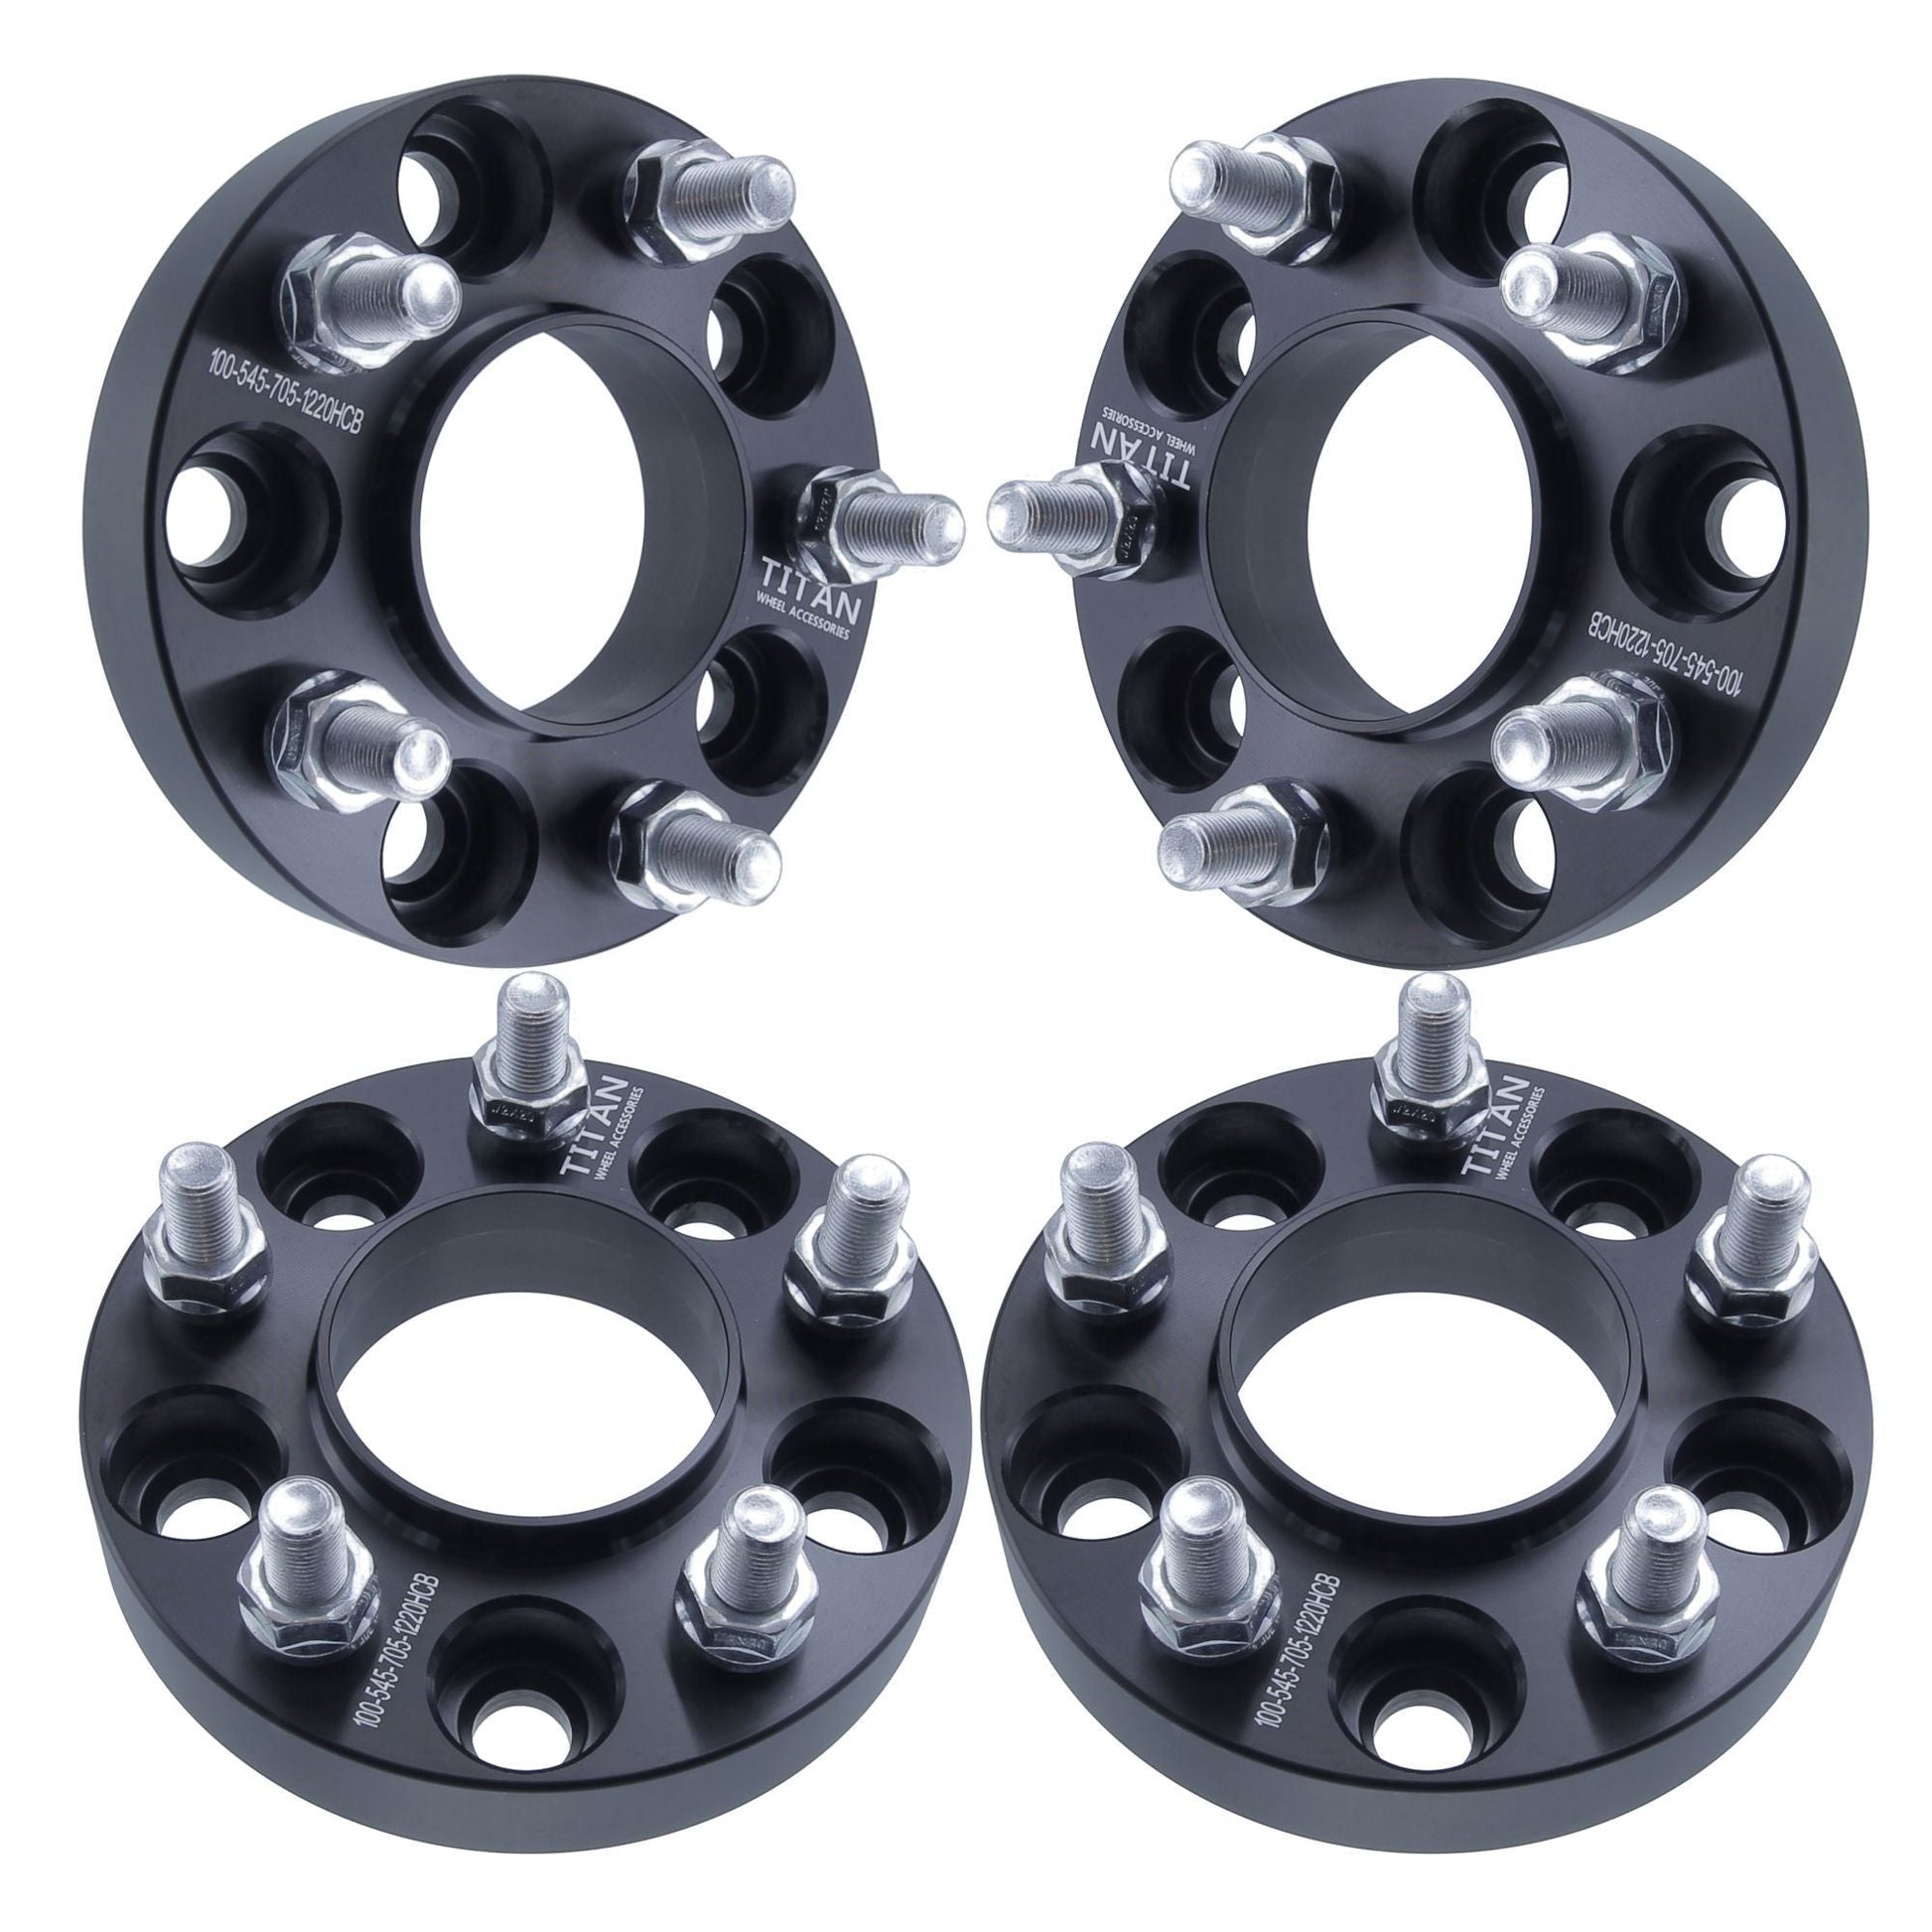 1.25" (32mm) Titan Wheel Spacers for Ford Mustang Ranger Edge Explorer | 5x4.5 (5x114.3) | 70.5 Hubcentric |1/2x20 Studs |  Set of 4 | Titan Wheel Accessories